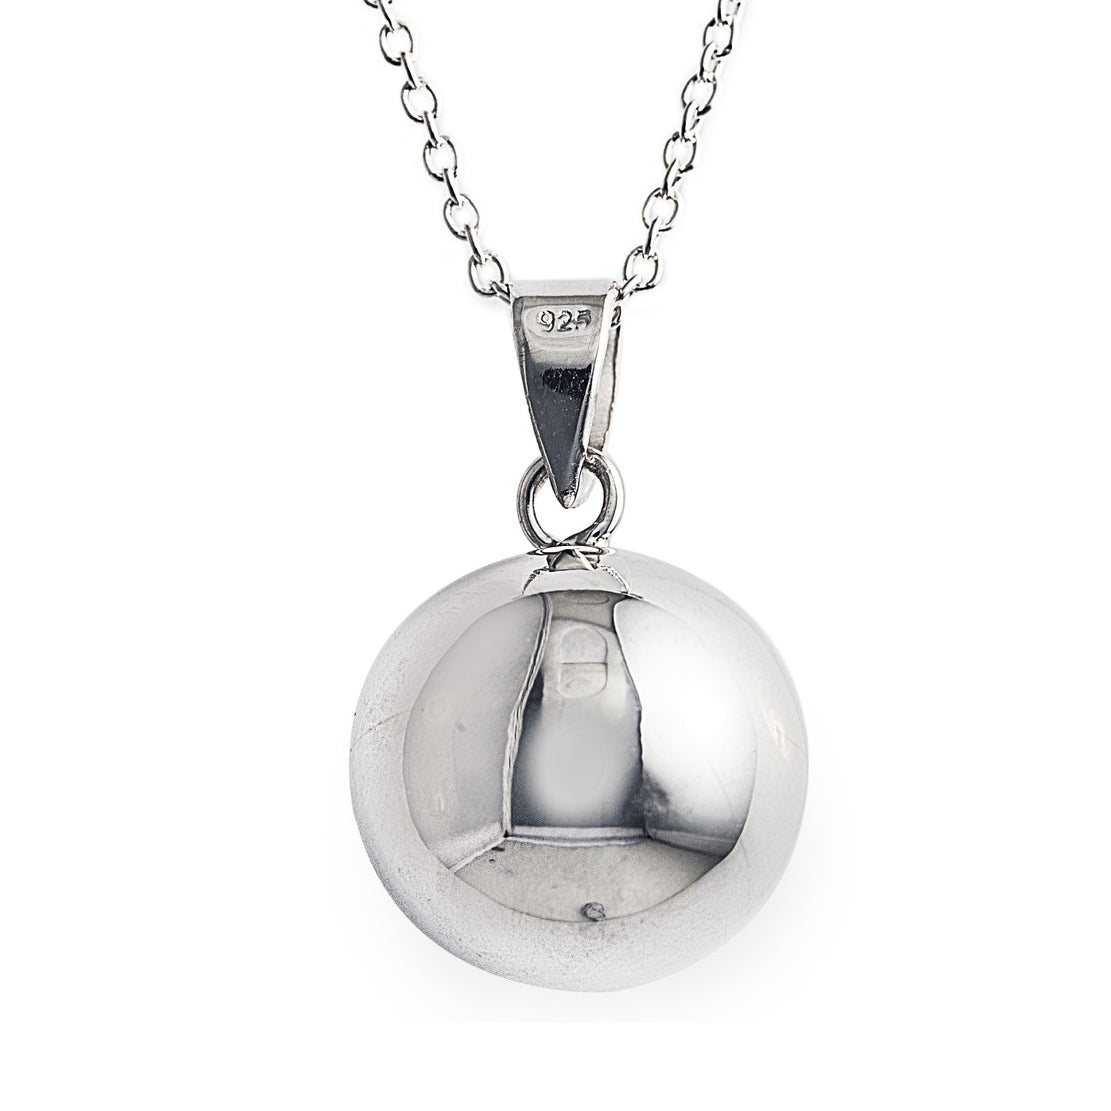 'Look at My Villa Necklace' features an extra-large 925 sterling silver pendant ball, with a silver ball chain. Worldwide shipping.